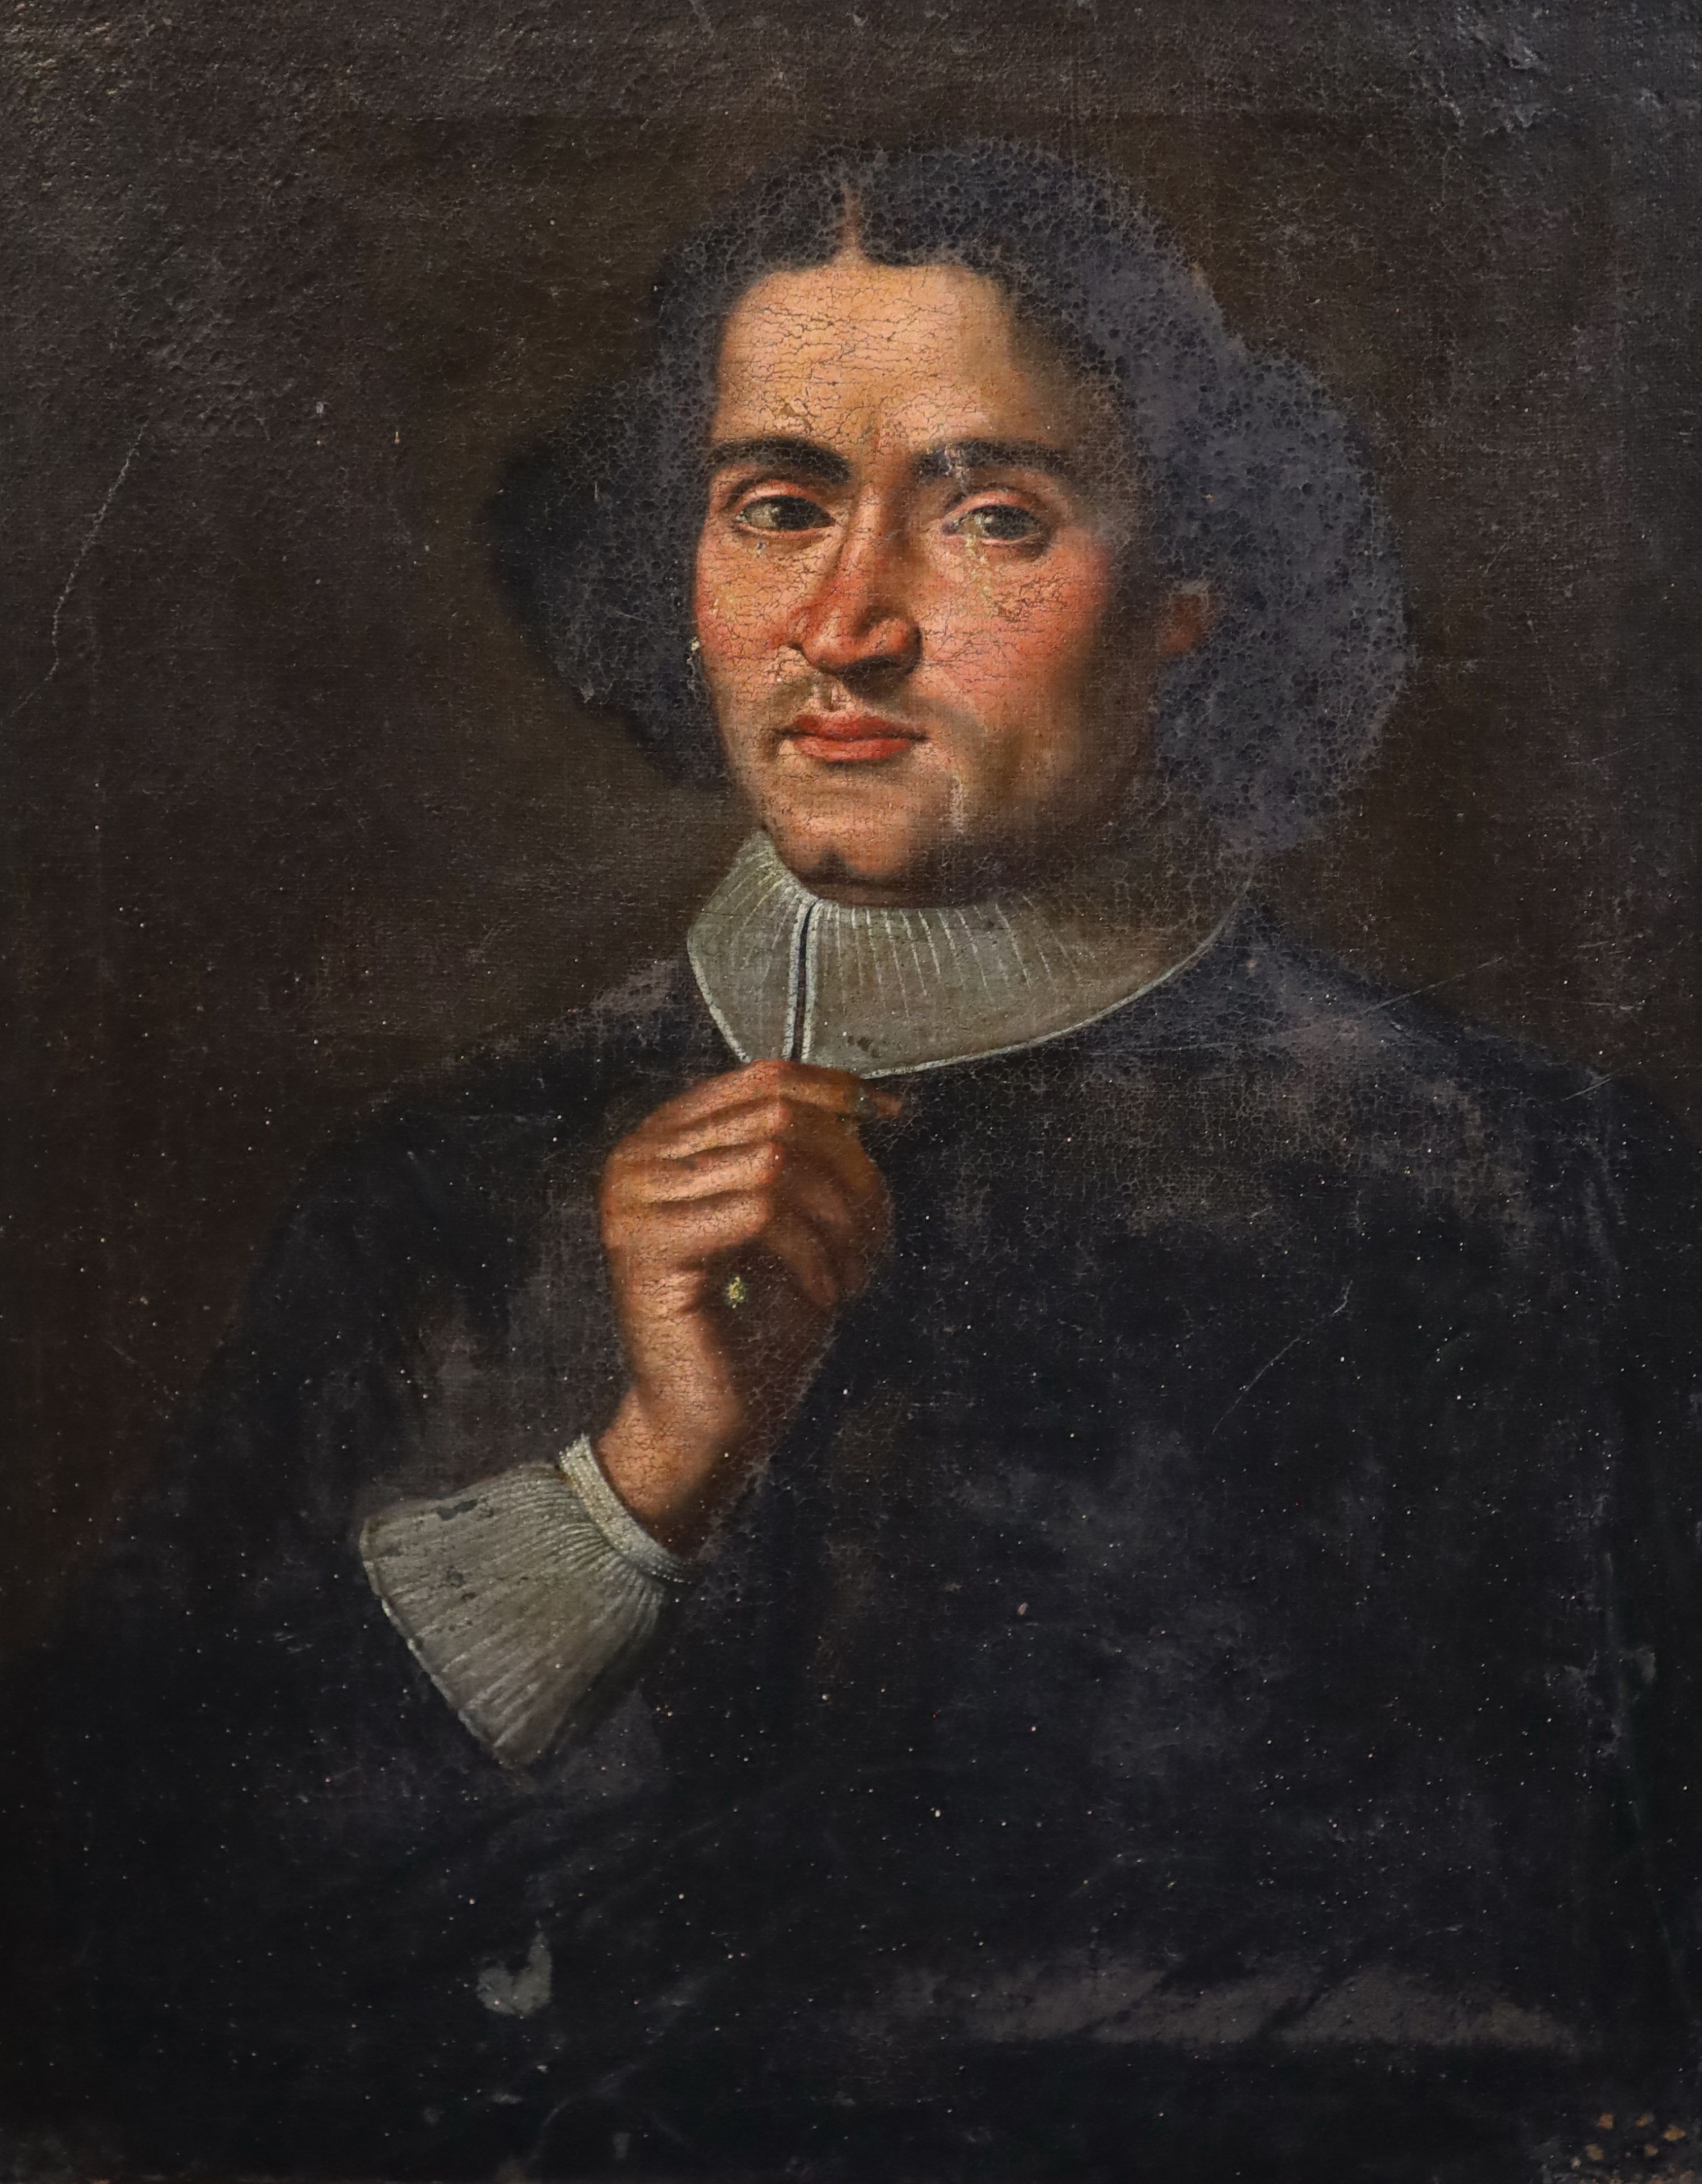 17th century Continental School, Portrait of a young man, oil on canvas, 75 x 59.5cm, unframed